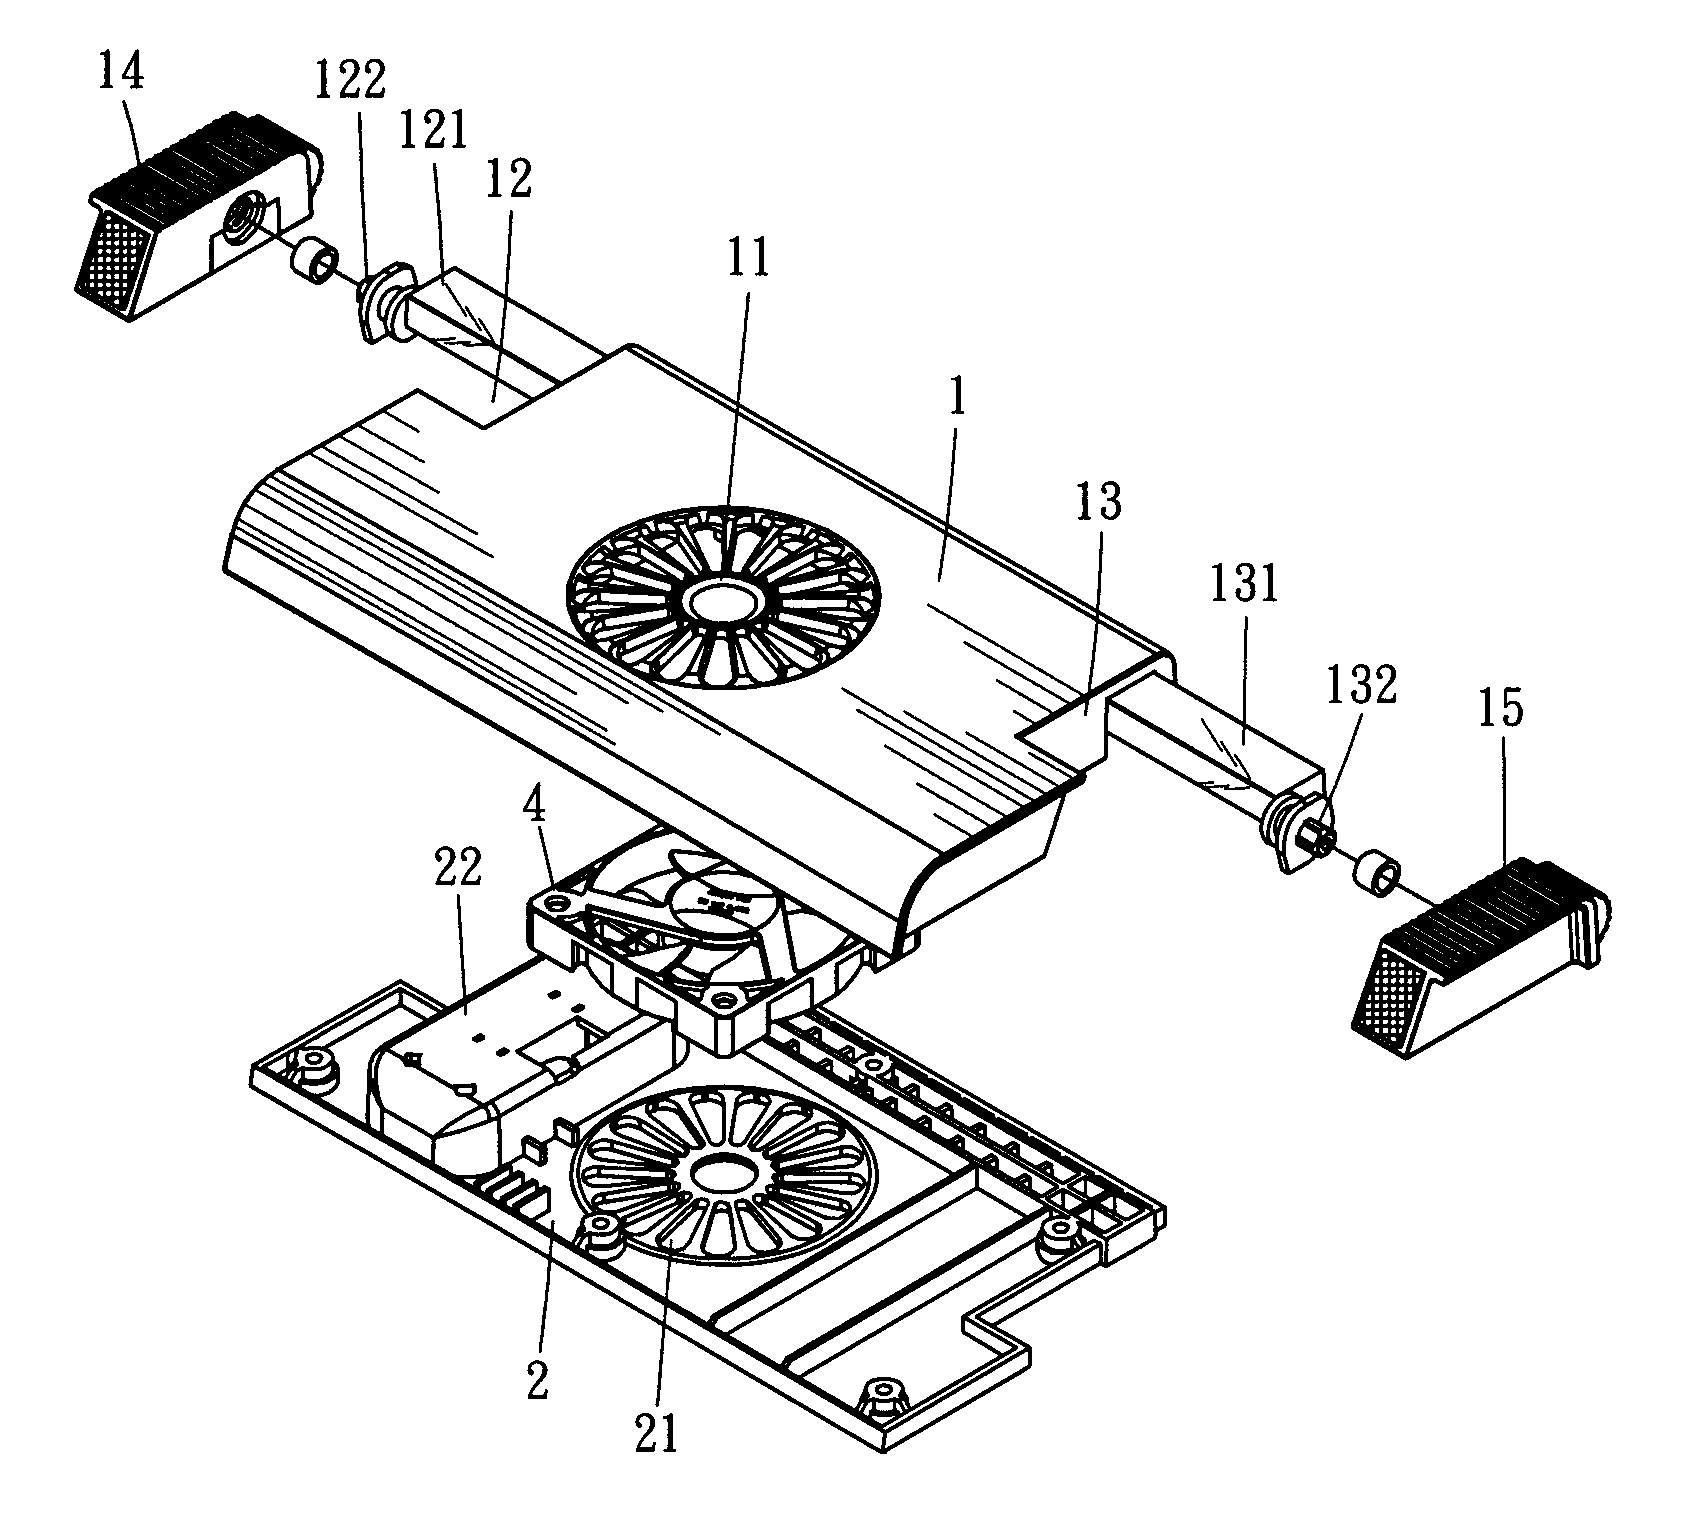 Heat-dissipating seat for notebook computers